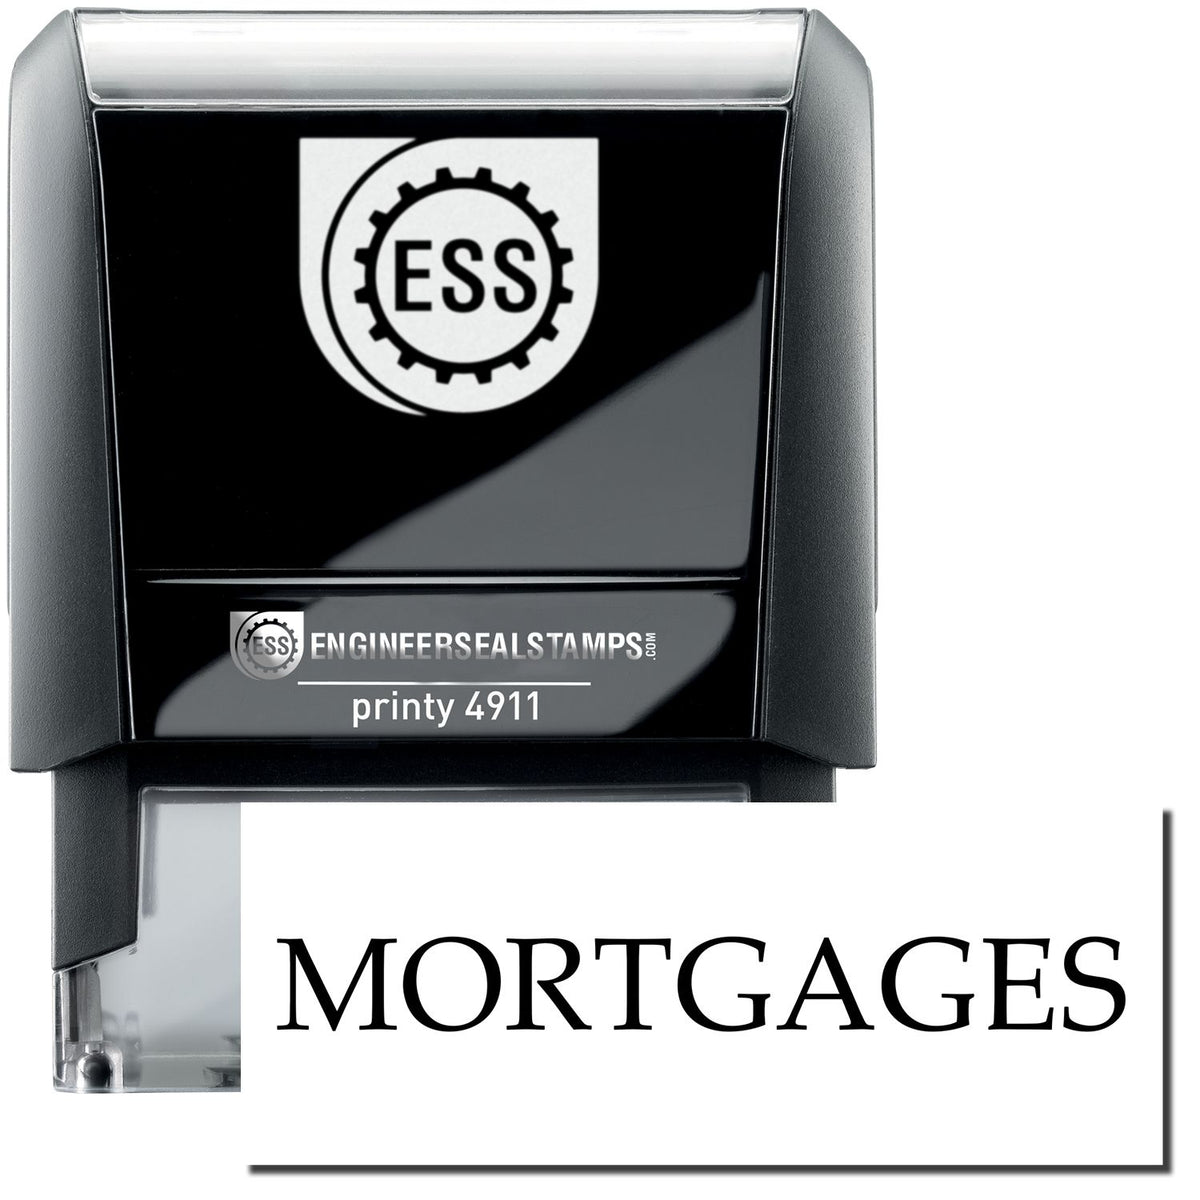 A self-inking stamp with a stamped image showing how the text &quot;MORTGAGES&quot; is displayed after stamping.